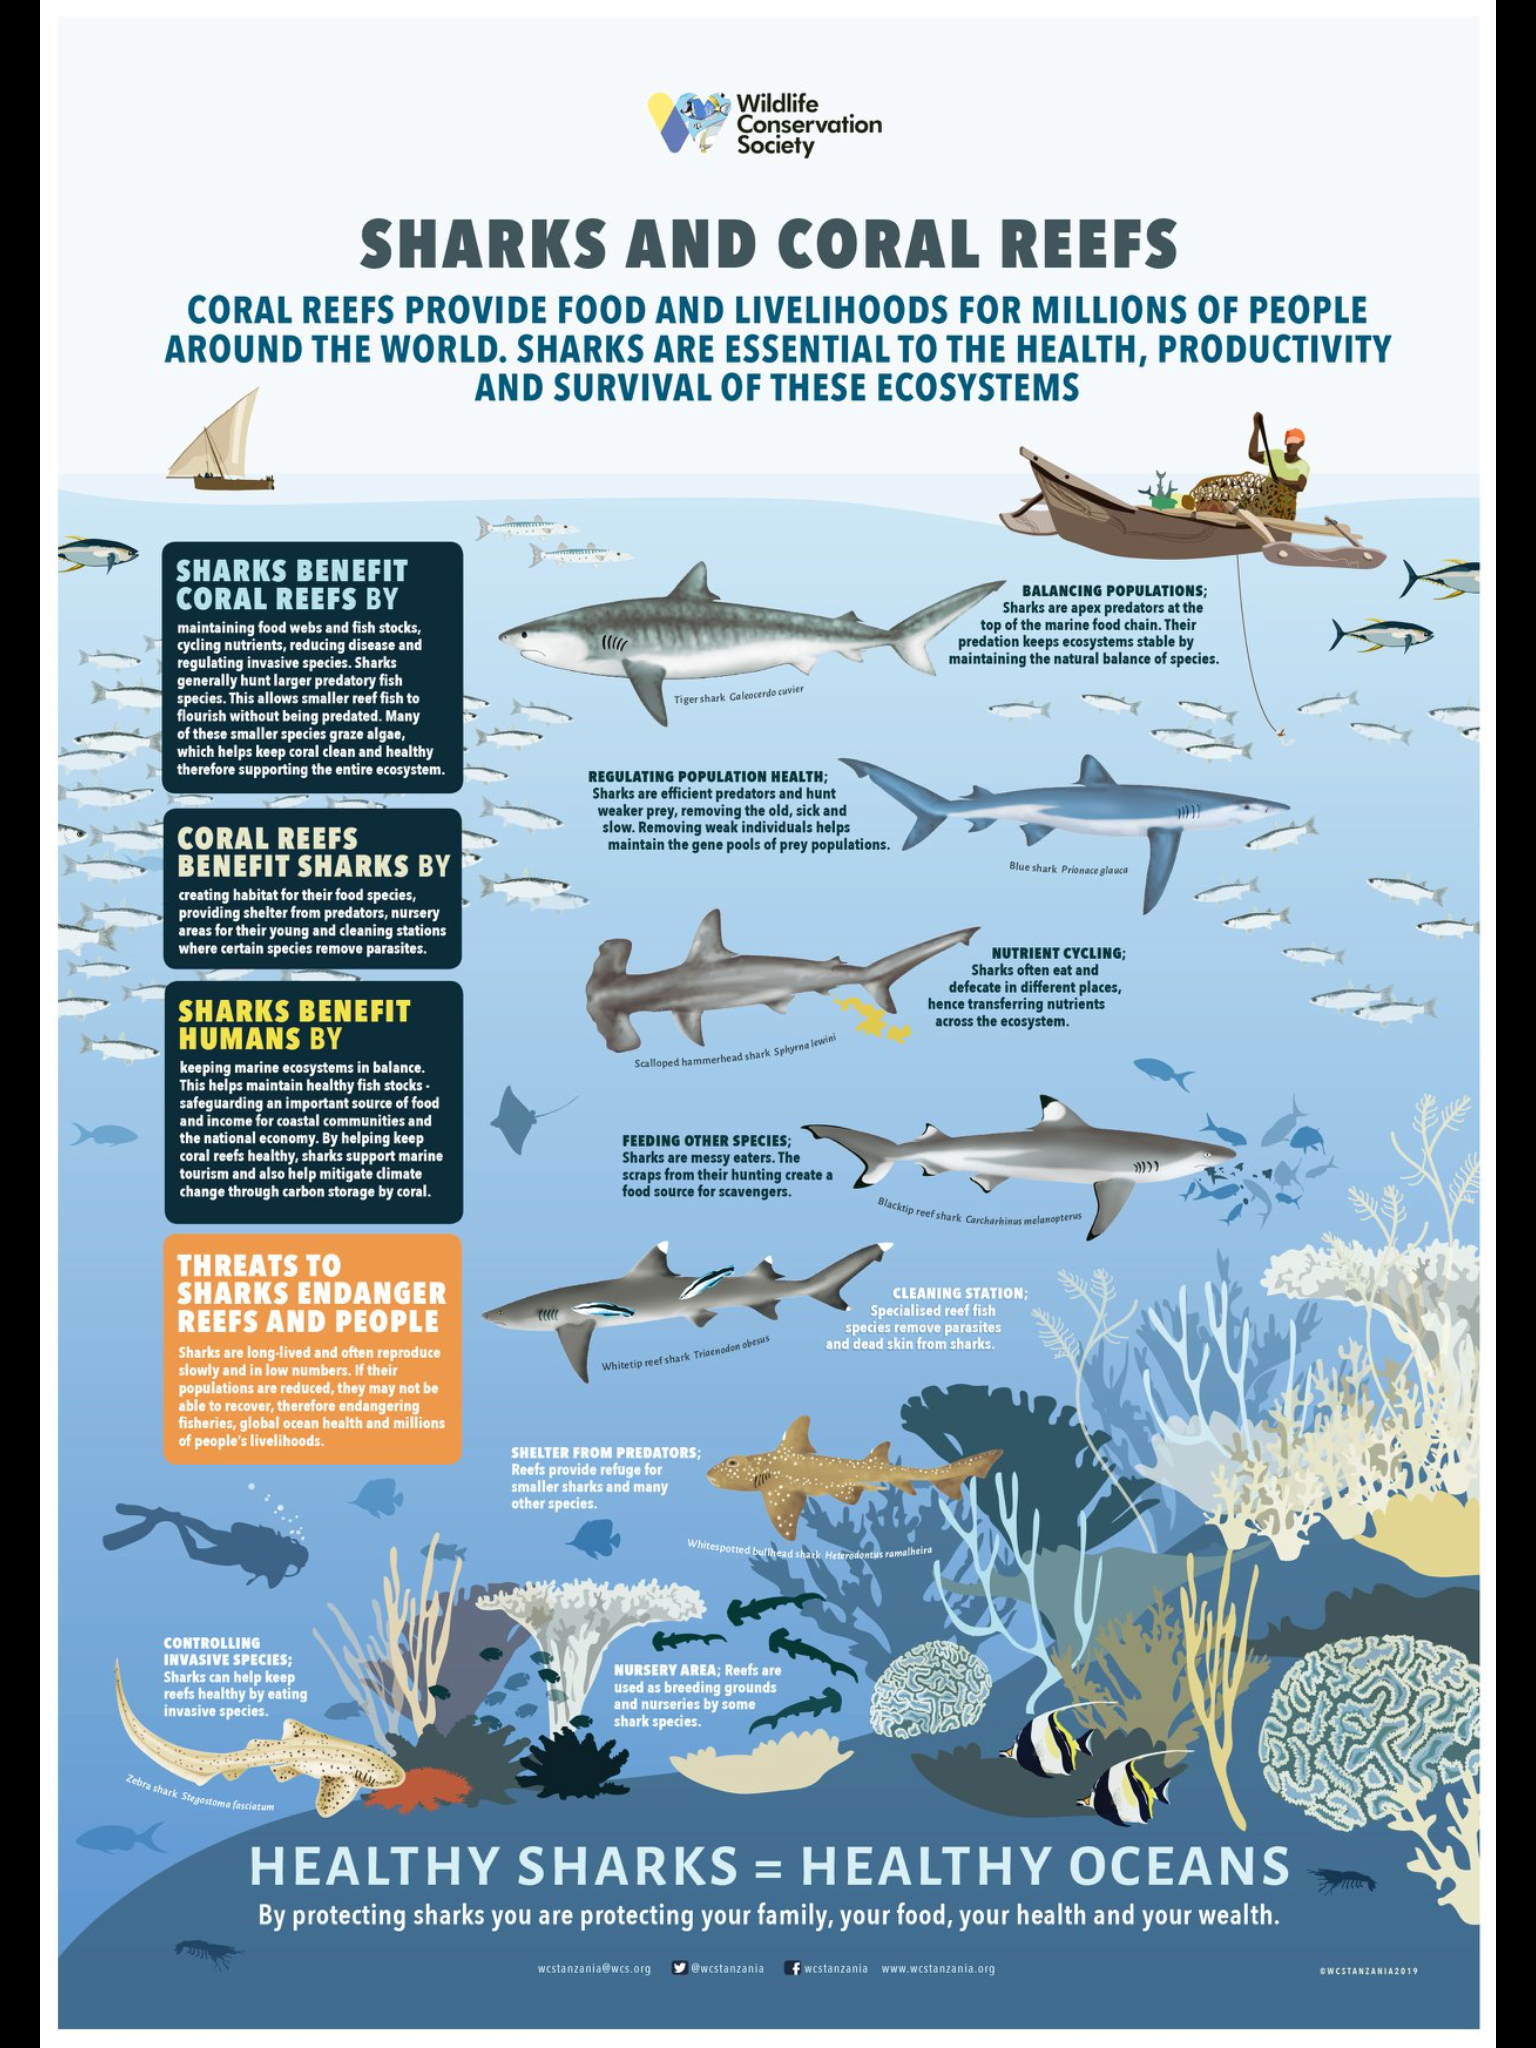 Sharks and Reefs - vital for each other